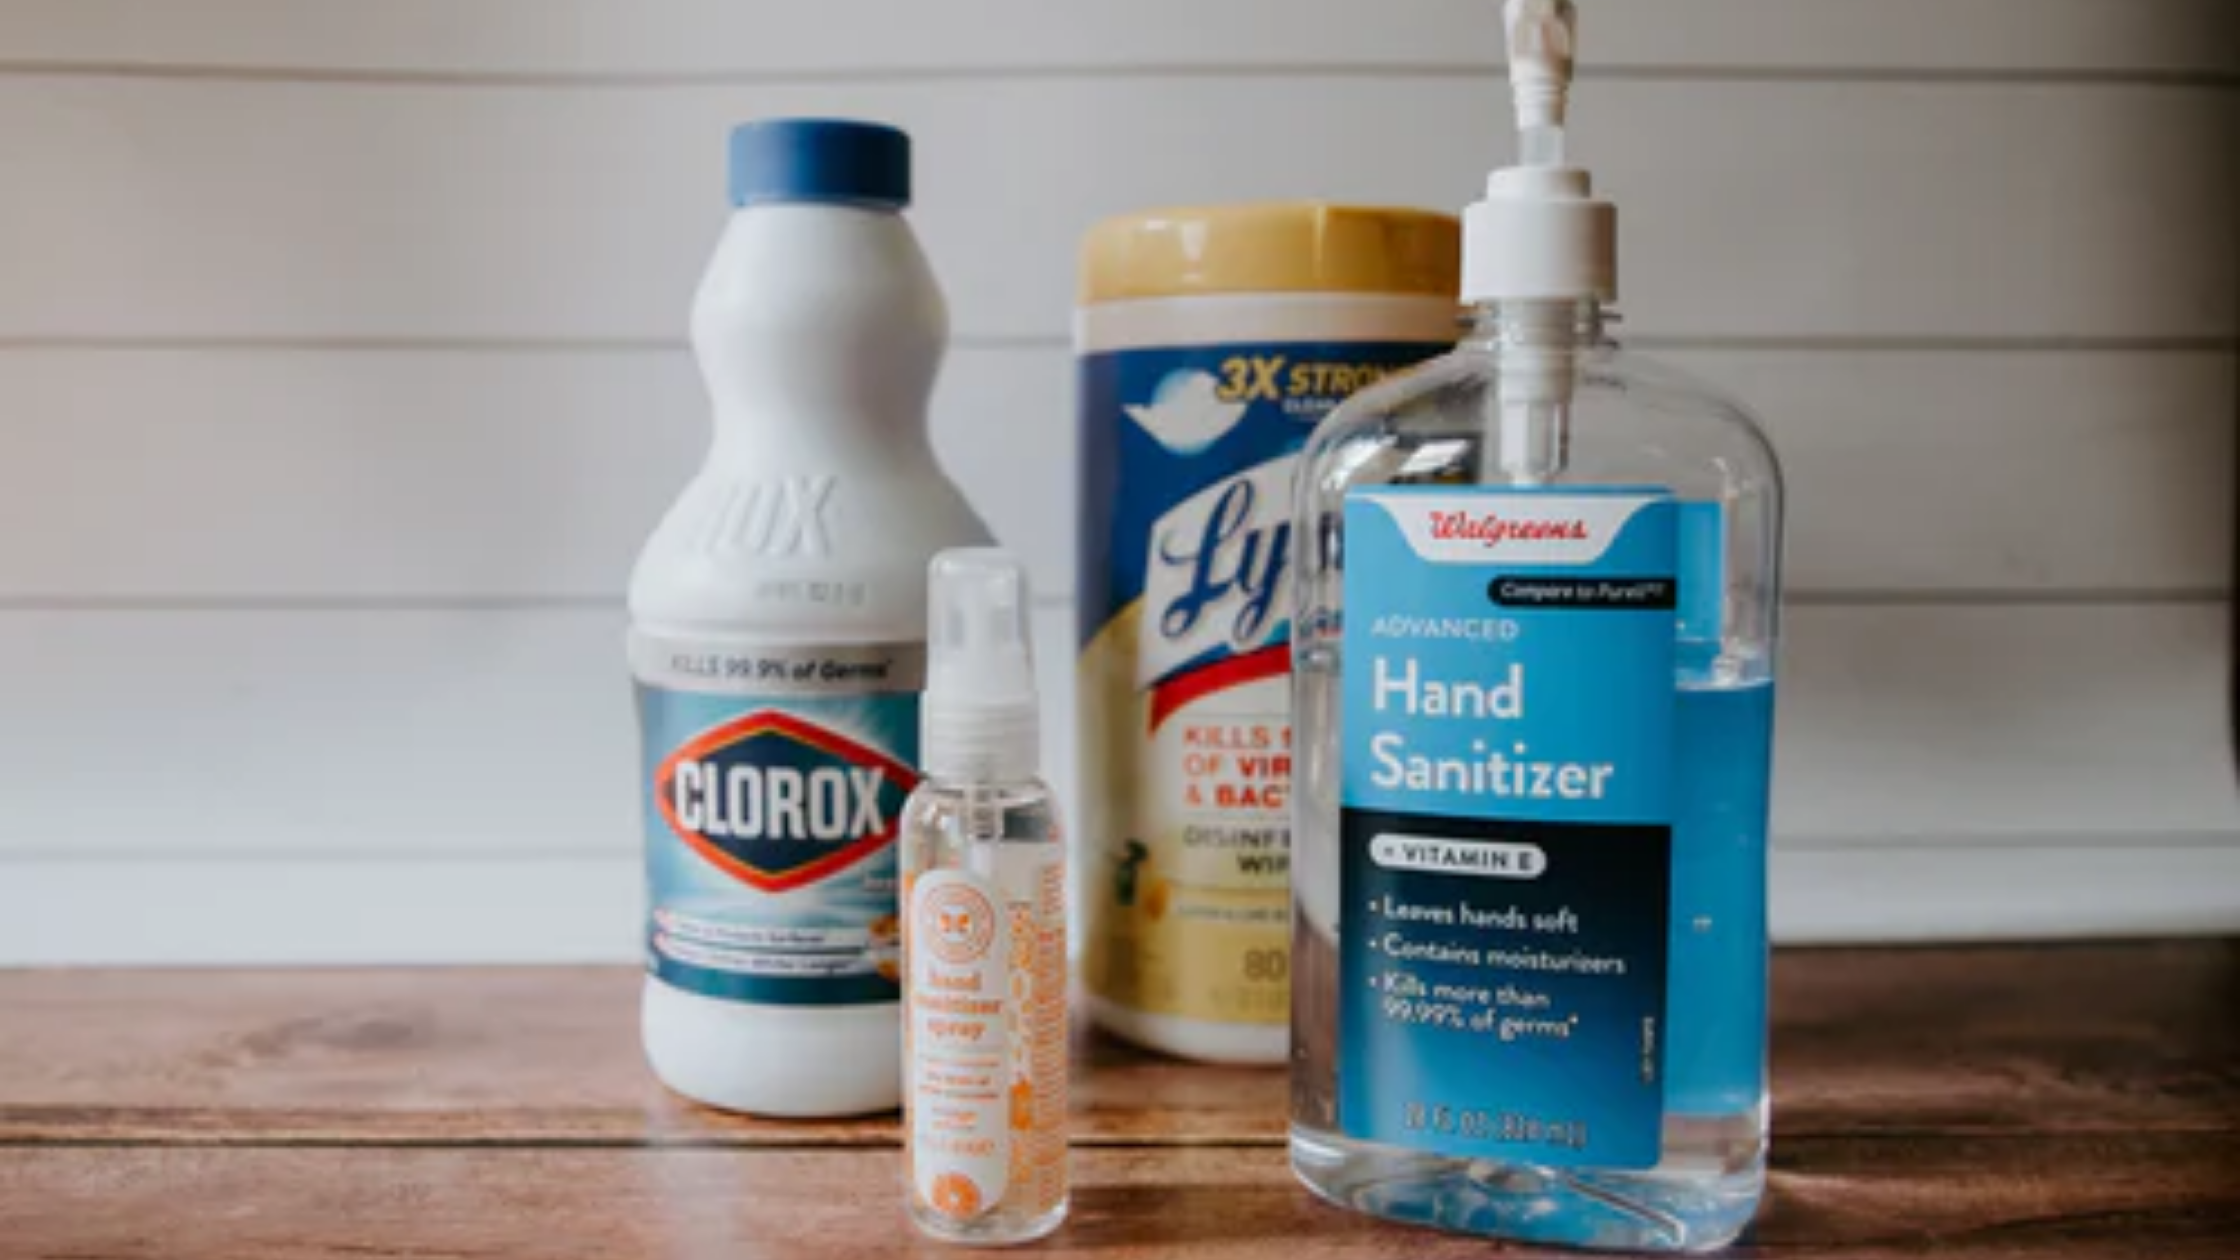 What Cleaning Solutions Should You Use To Sterilize Contaminated Items?